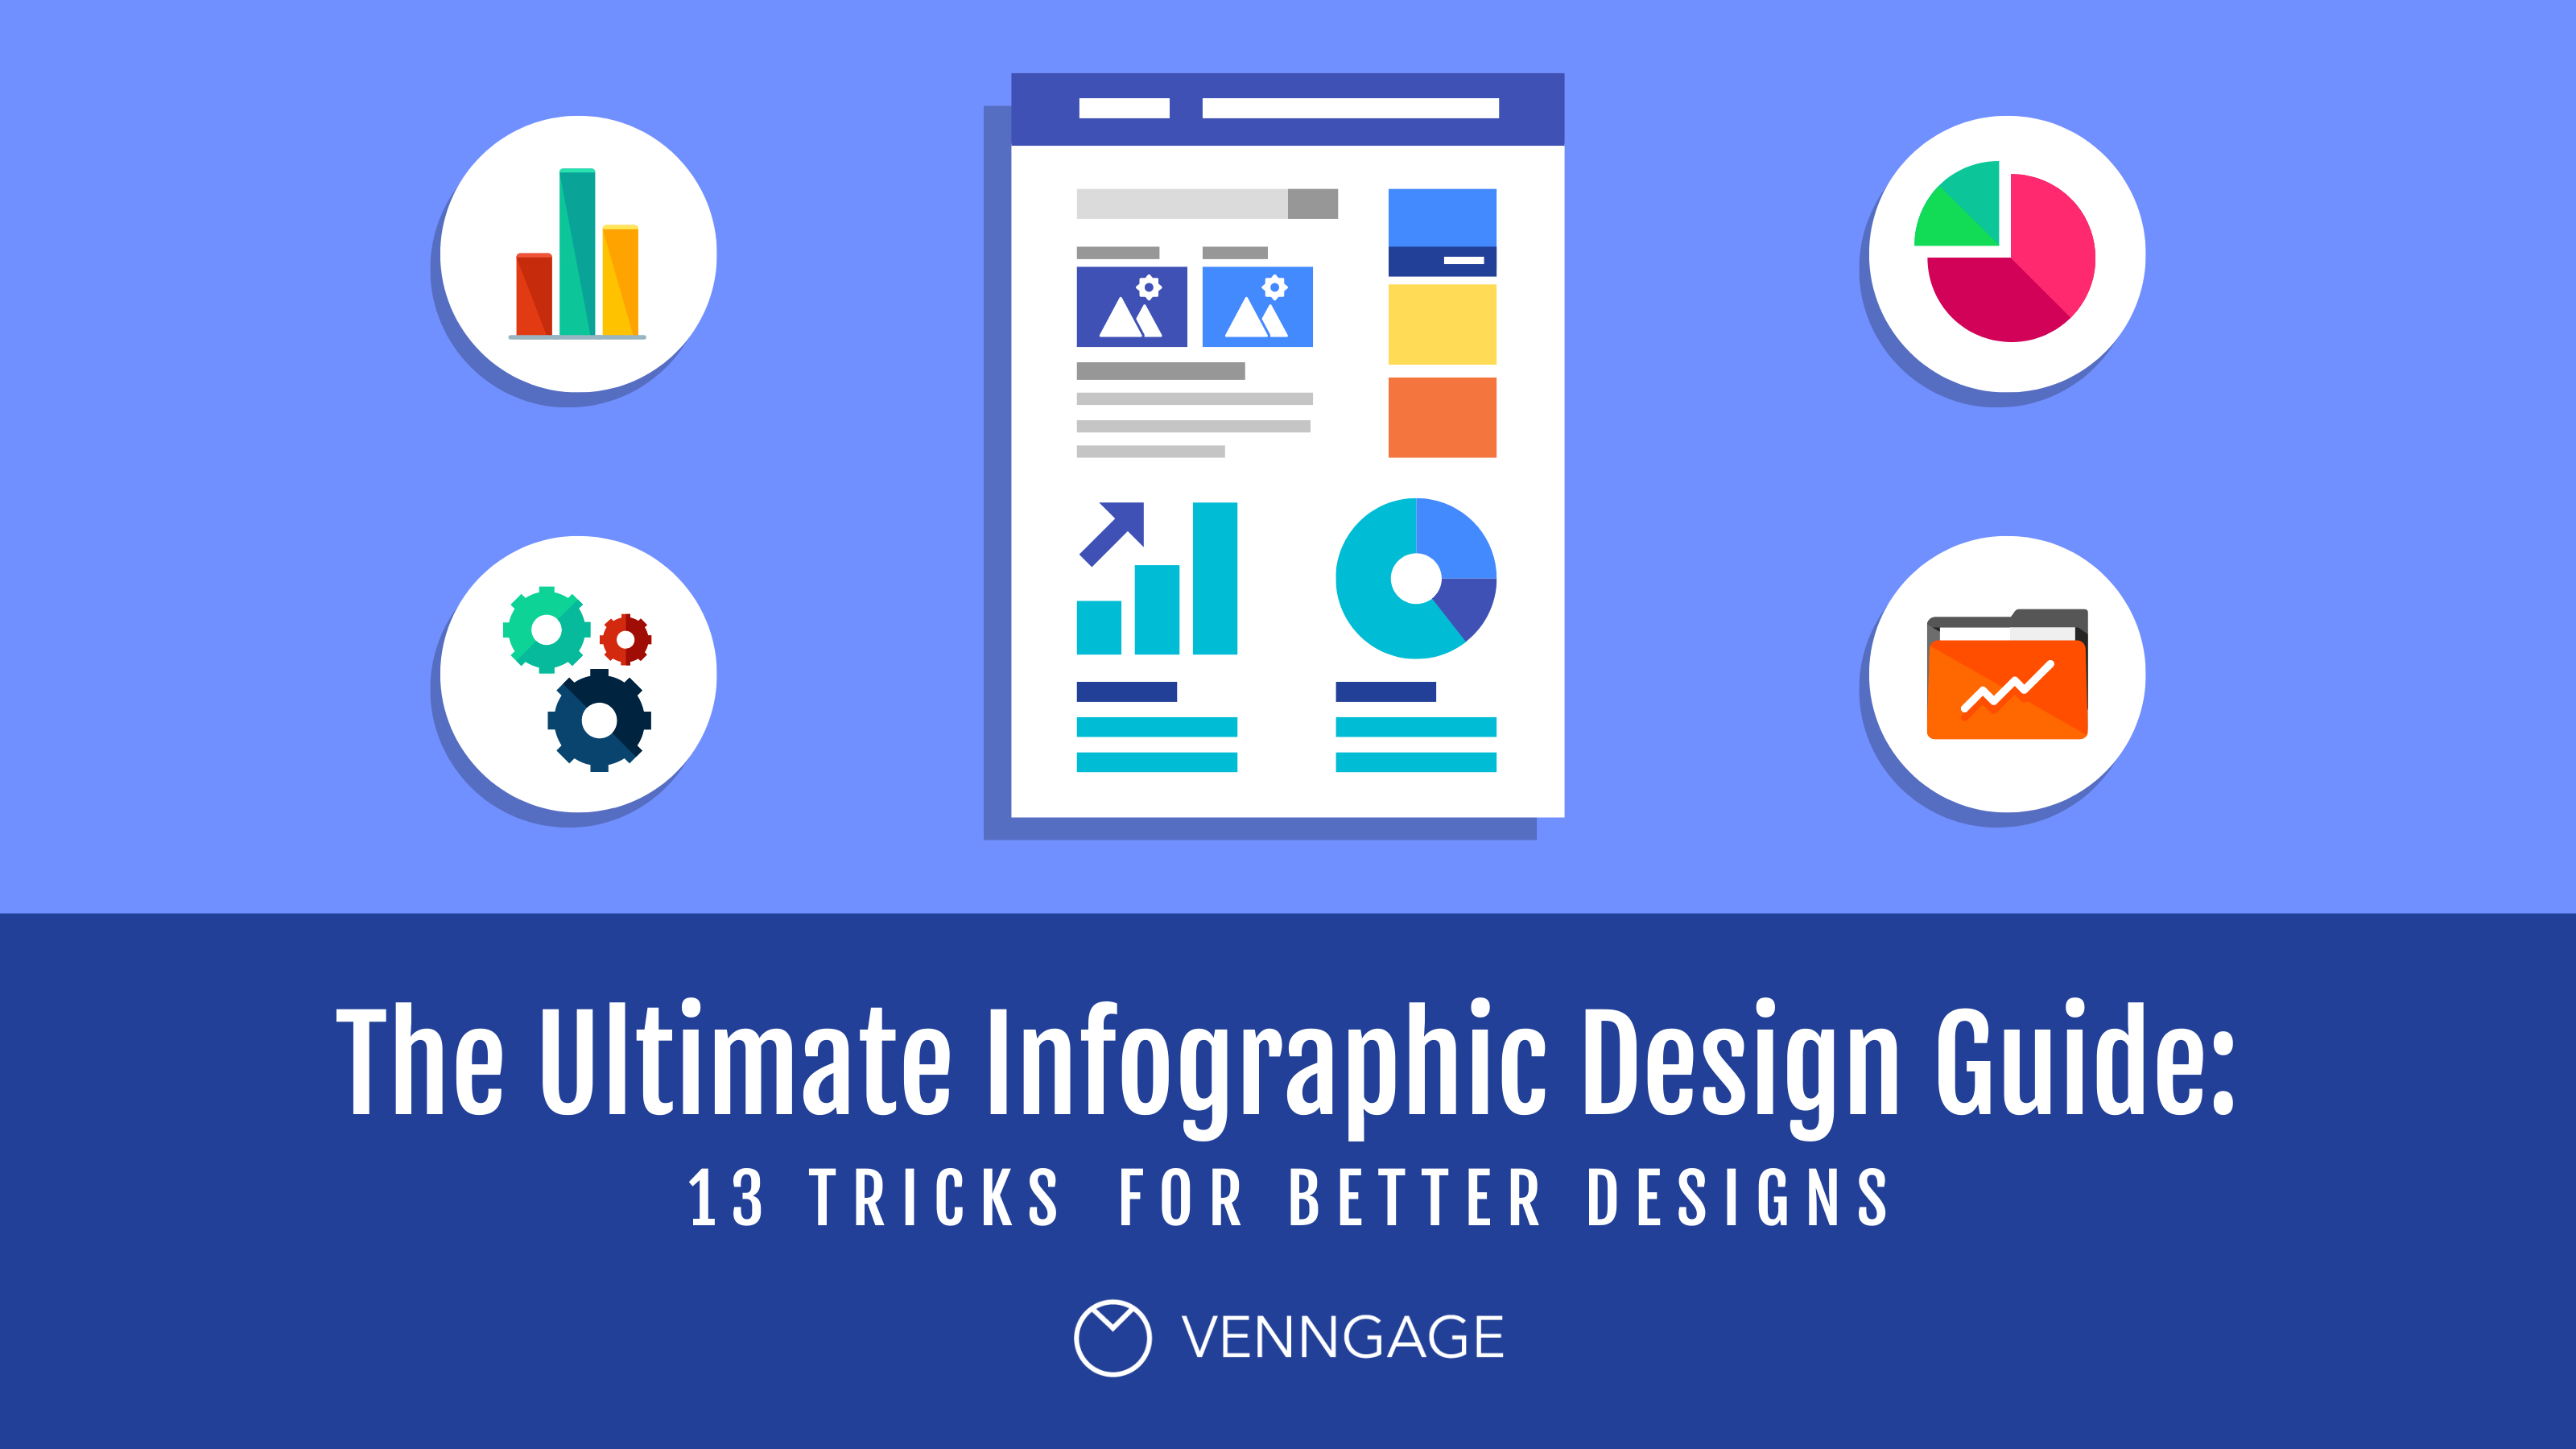 Infographic Design Guide